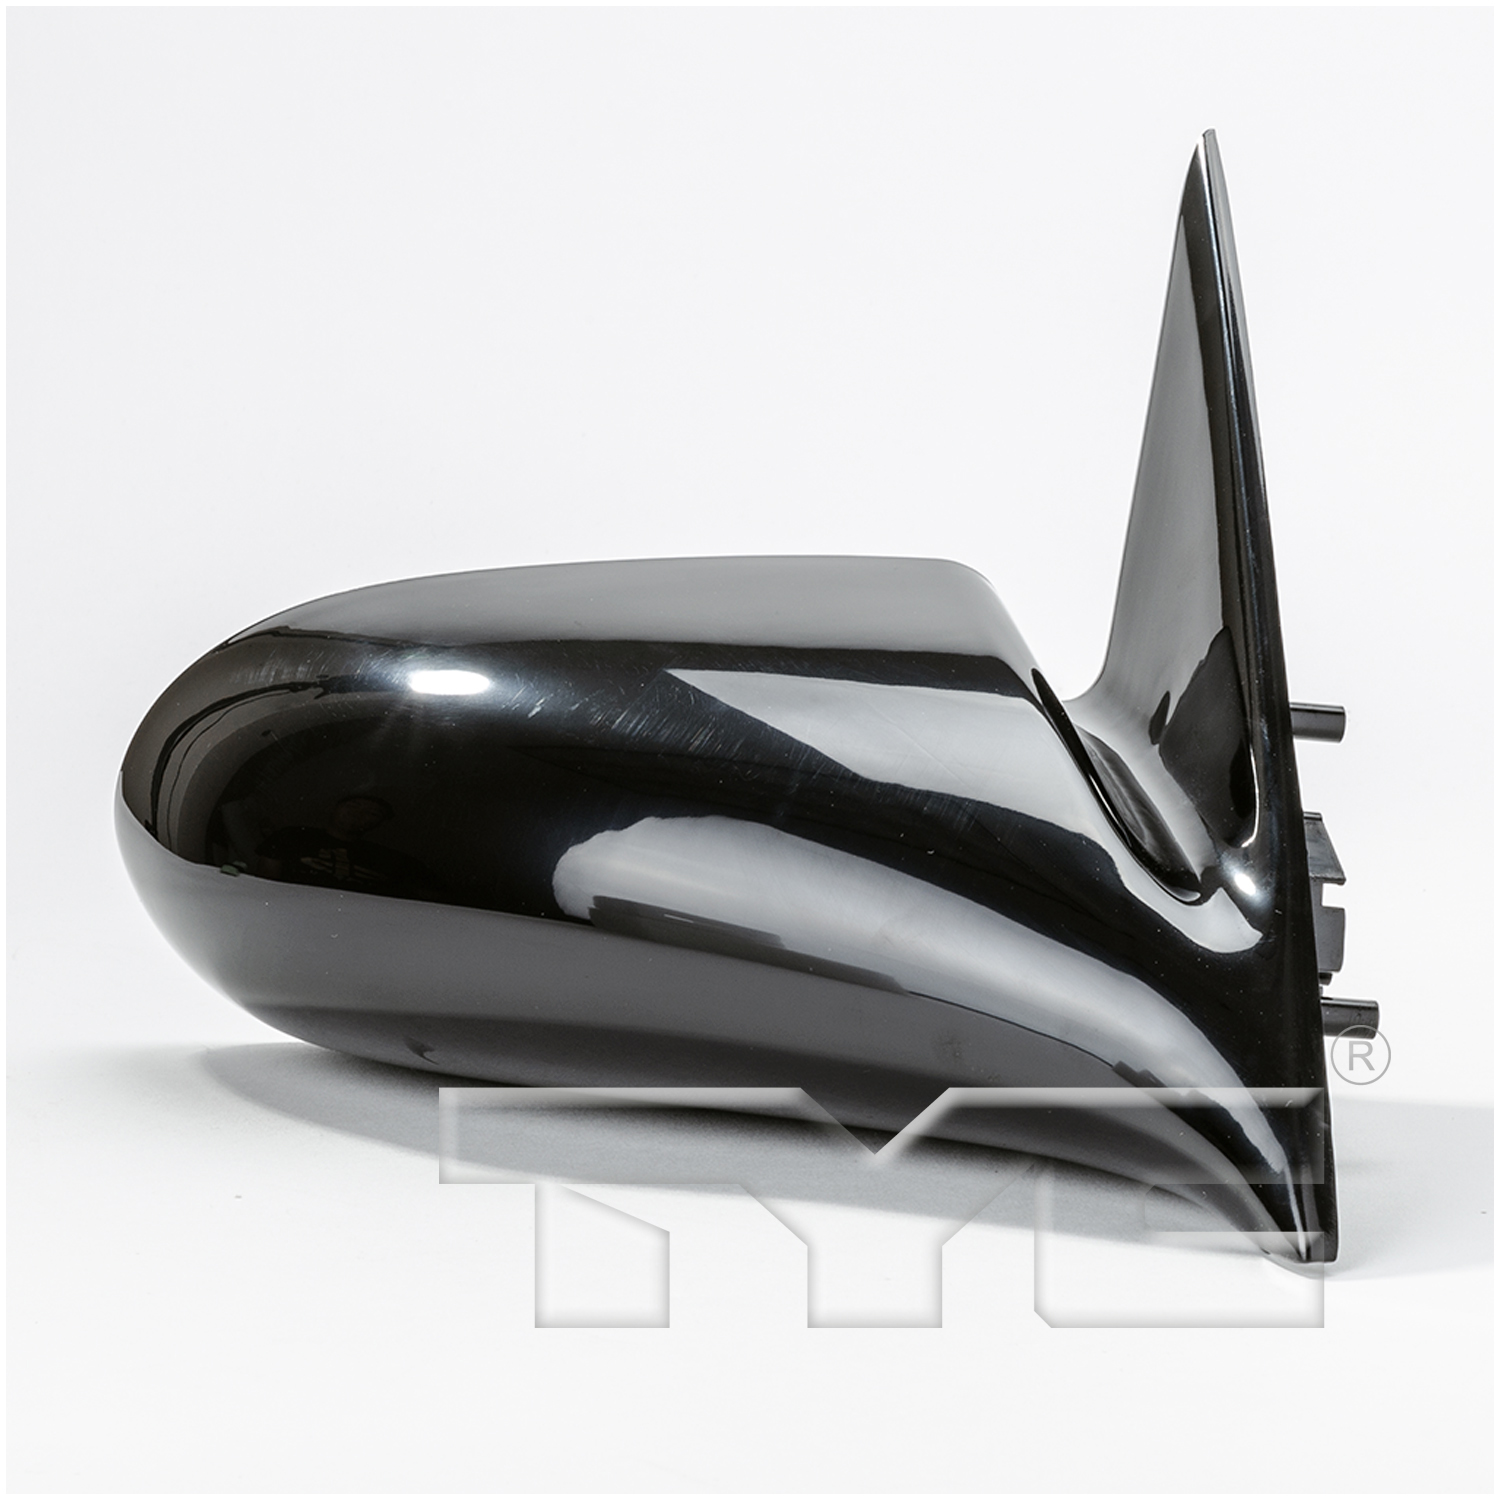 Aftermarket MIRRORS for GEO - METRO, METRO,95-97,RT Mirror outside rear view